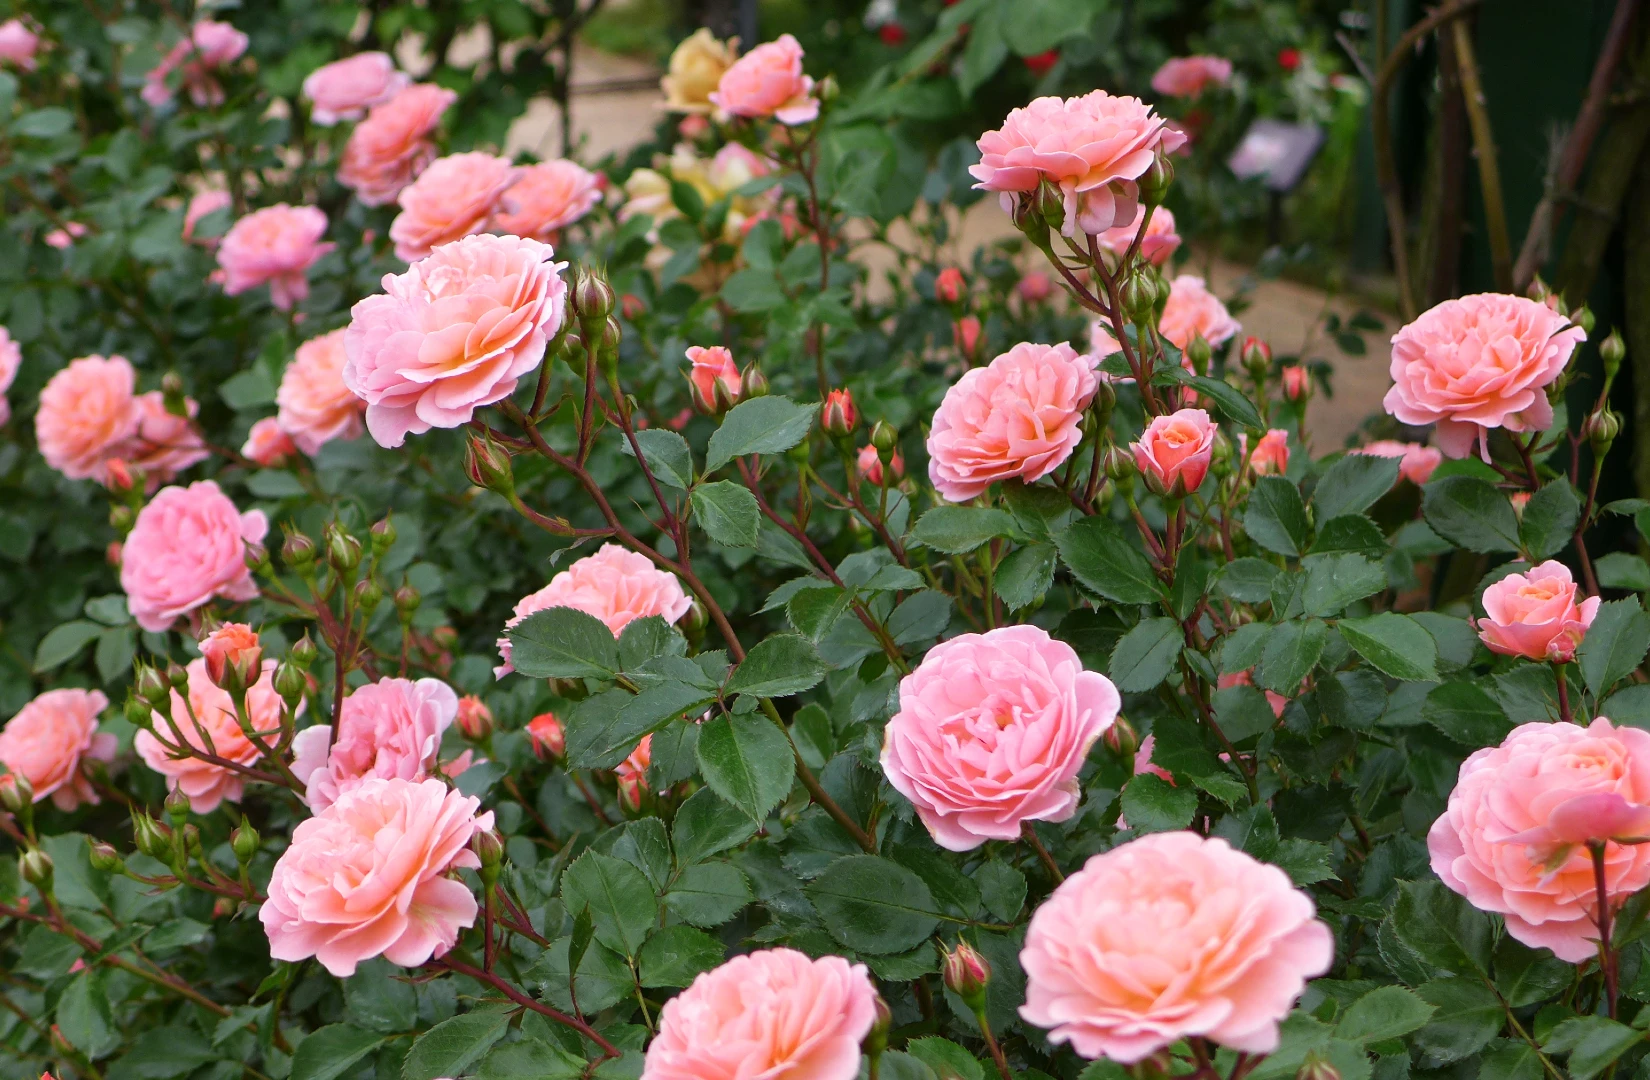 drift rose plant with peach to pink blooms